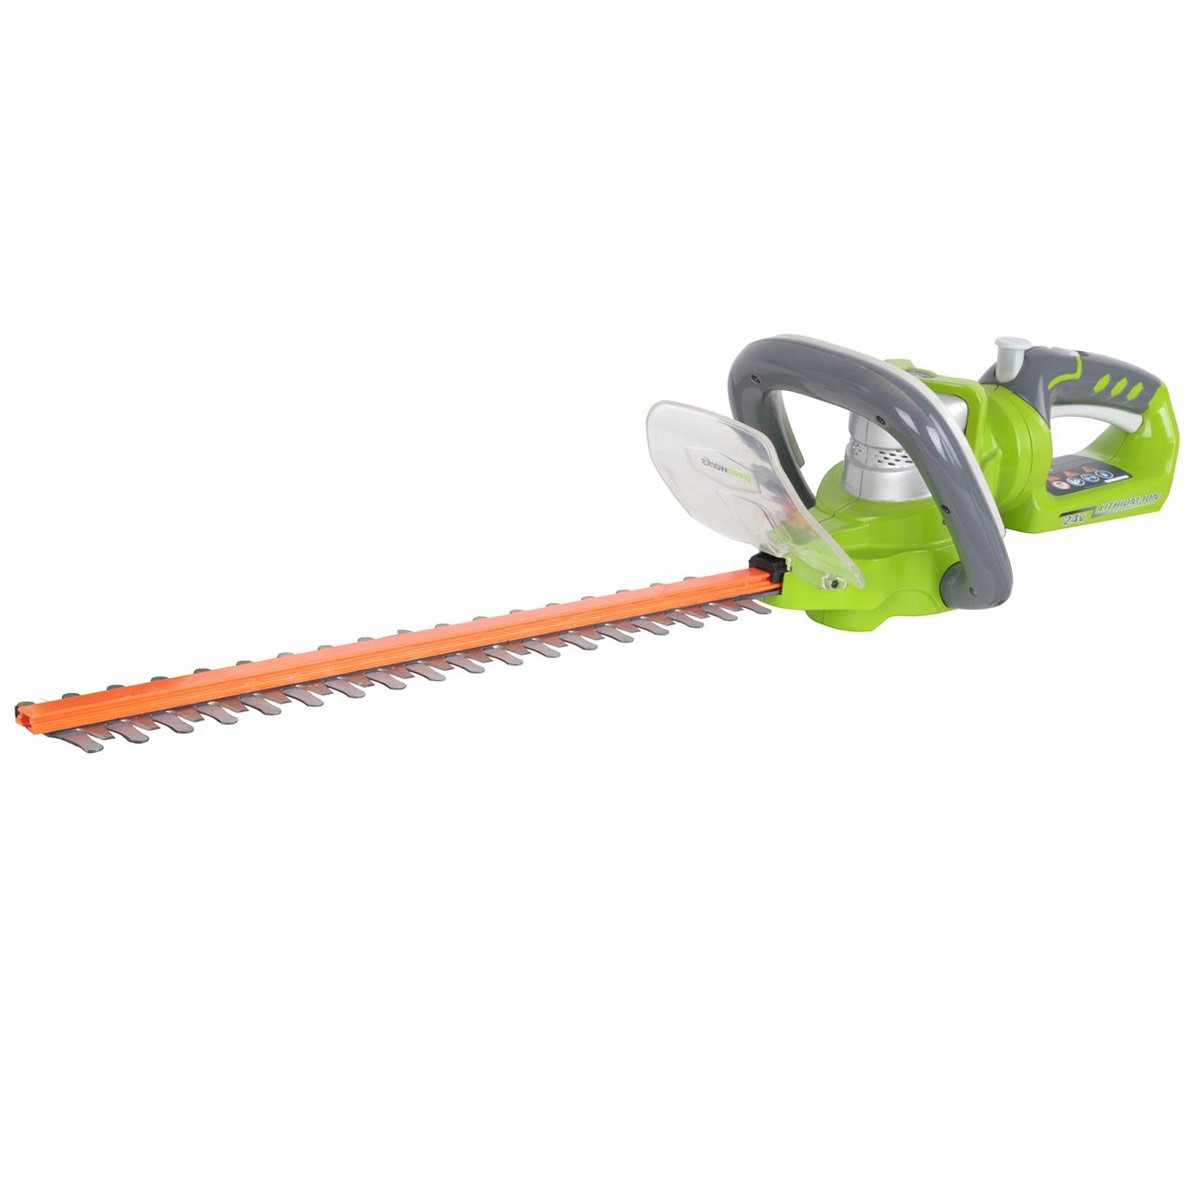 Greenworks 24v Deluxe Cordless Hedge Trimmer with Twist Handle (2200107-A)